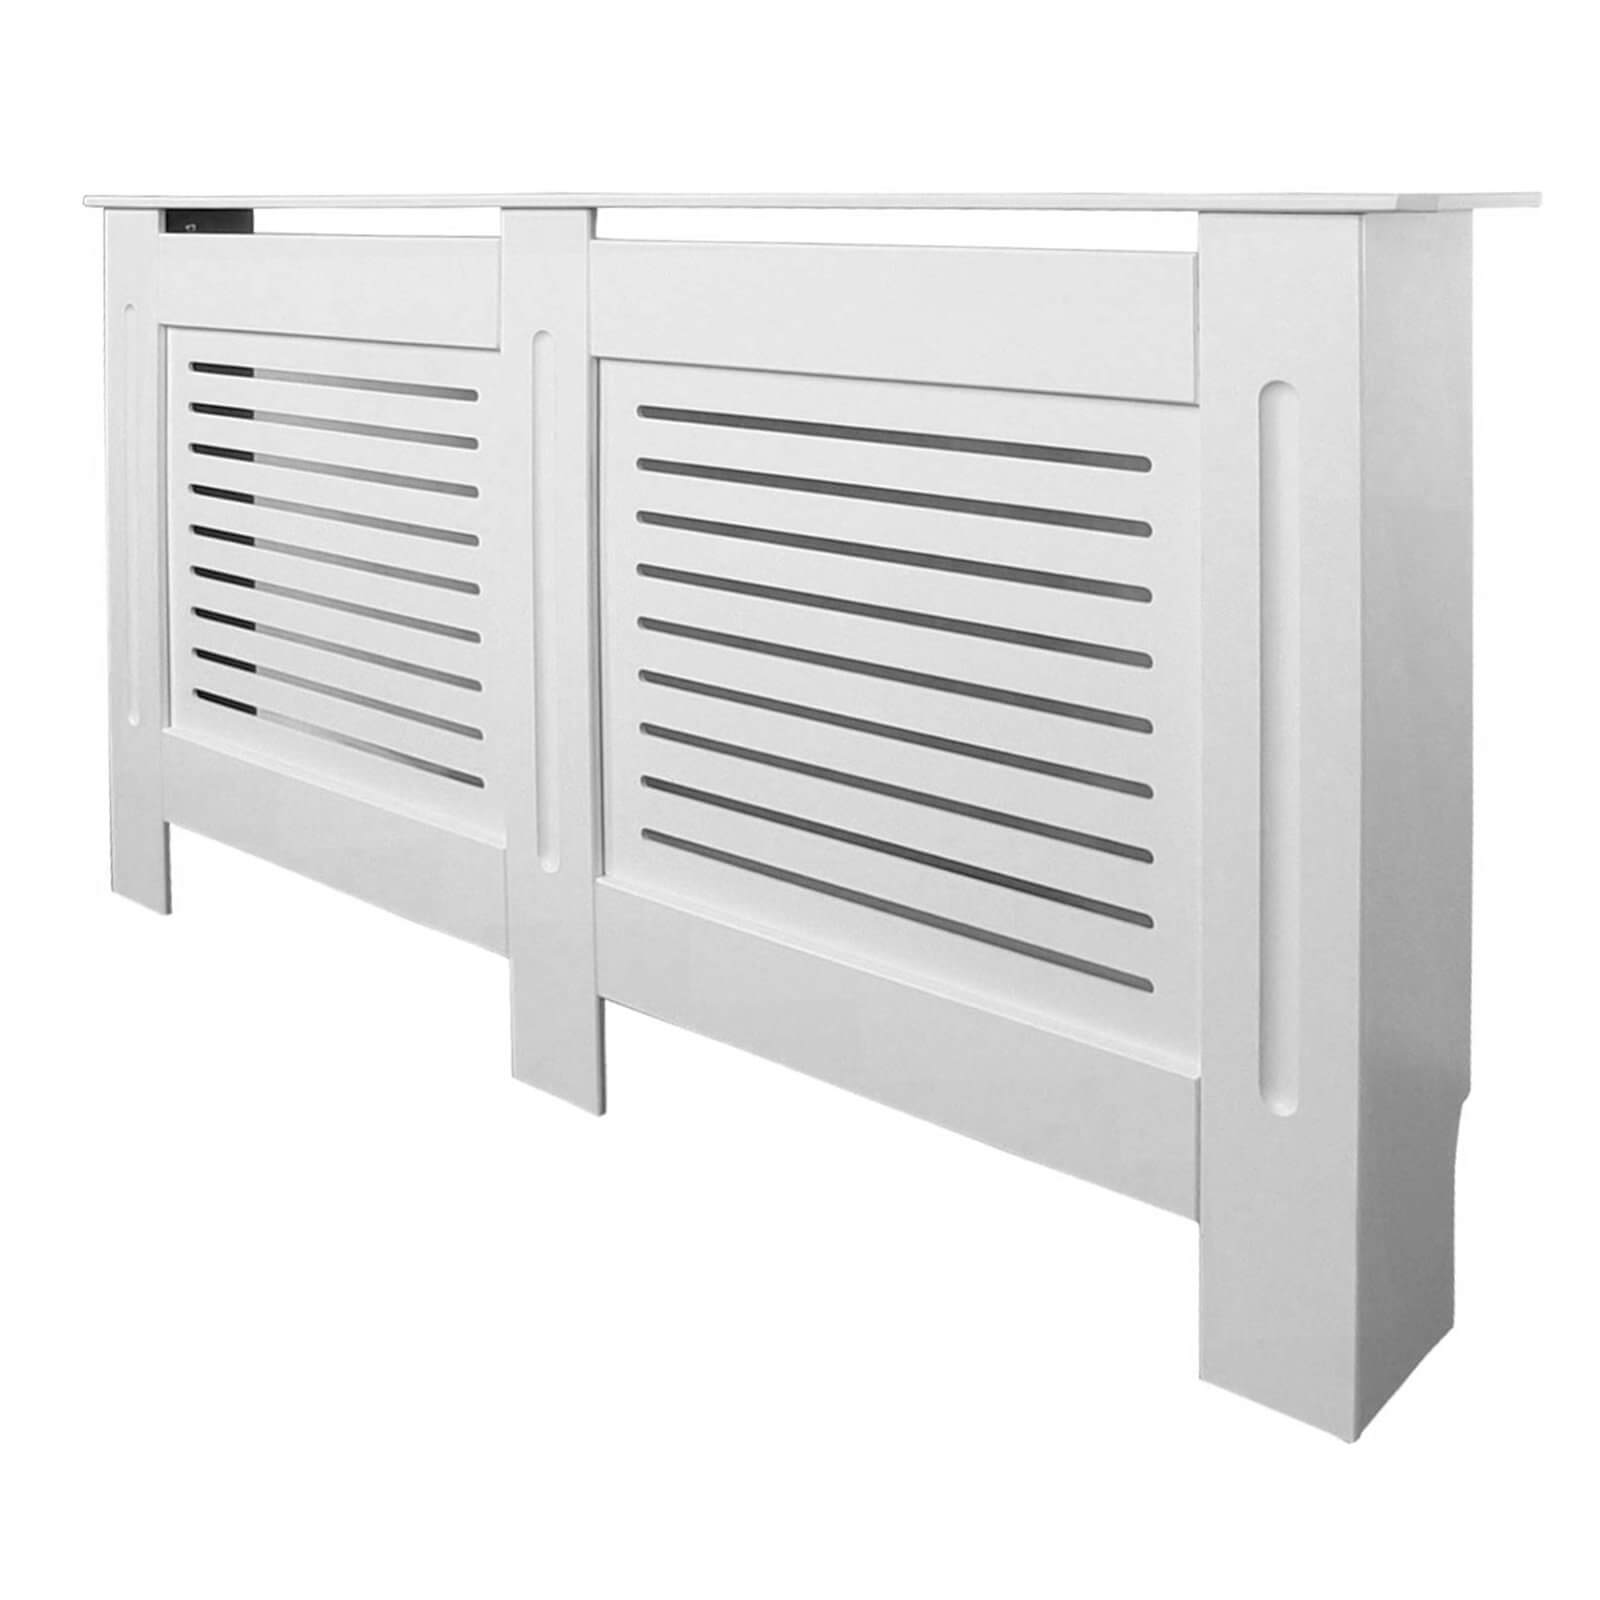 Radiator Cover with Horizontal Slatted Design in White - Extra Large